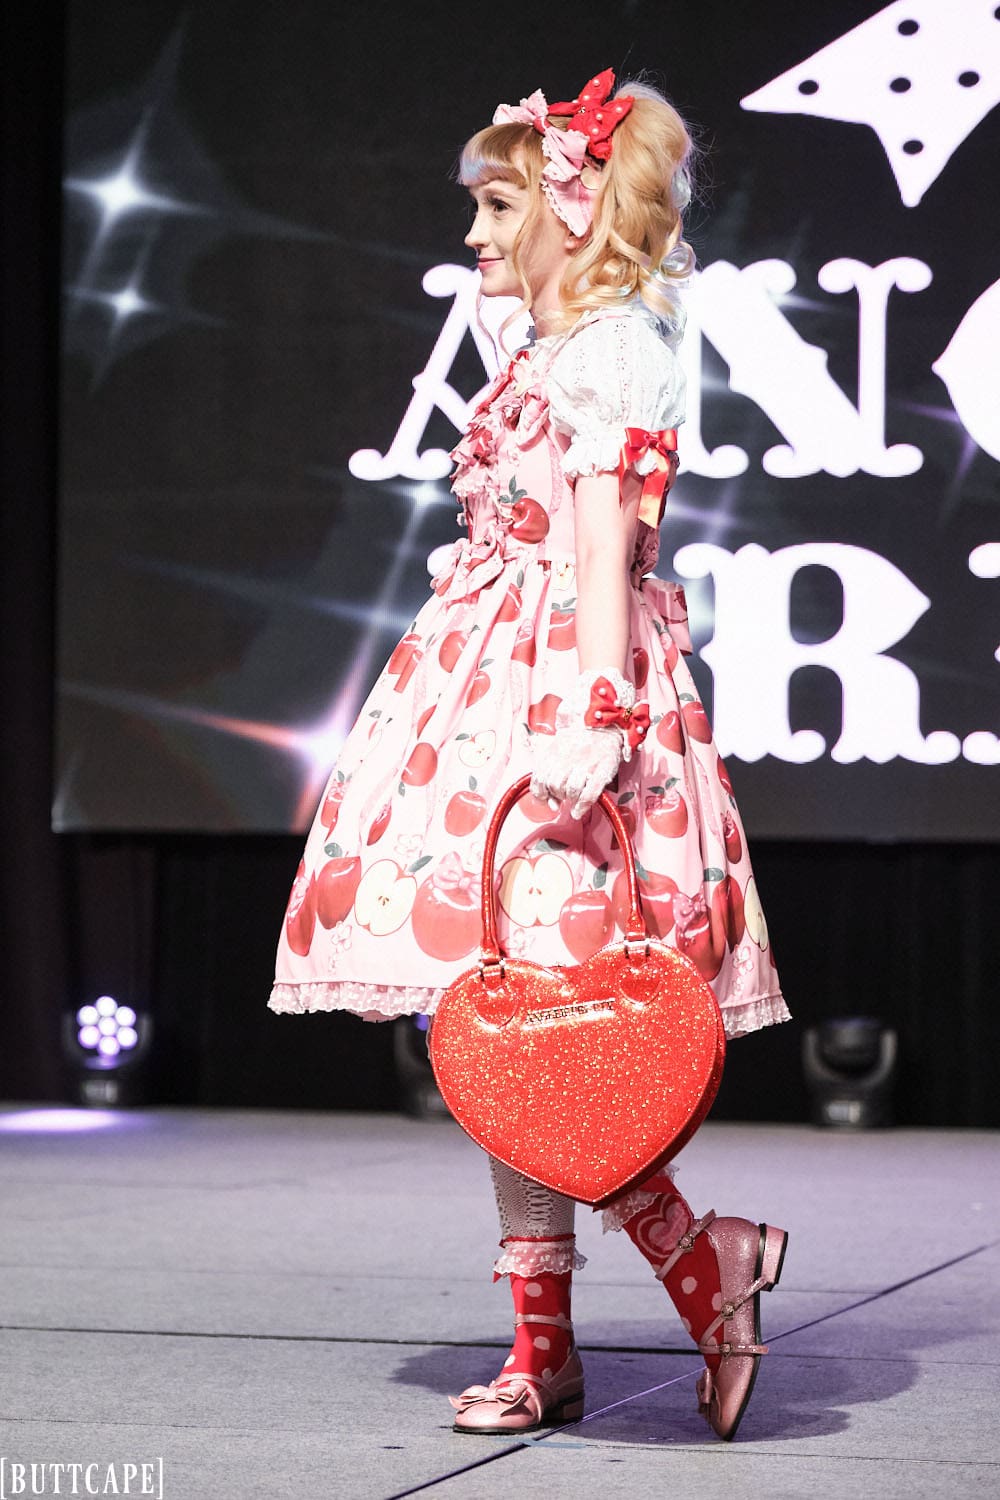 Model 3 wearing pink and red cherry themed lolita outfit holding red heart purse - side view.